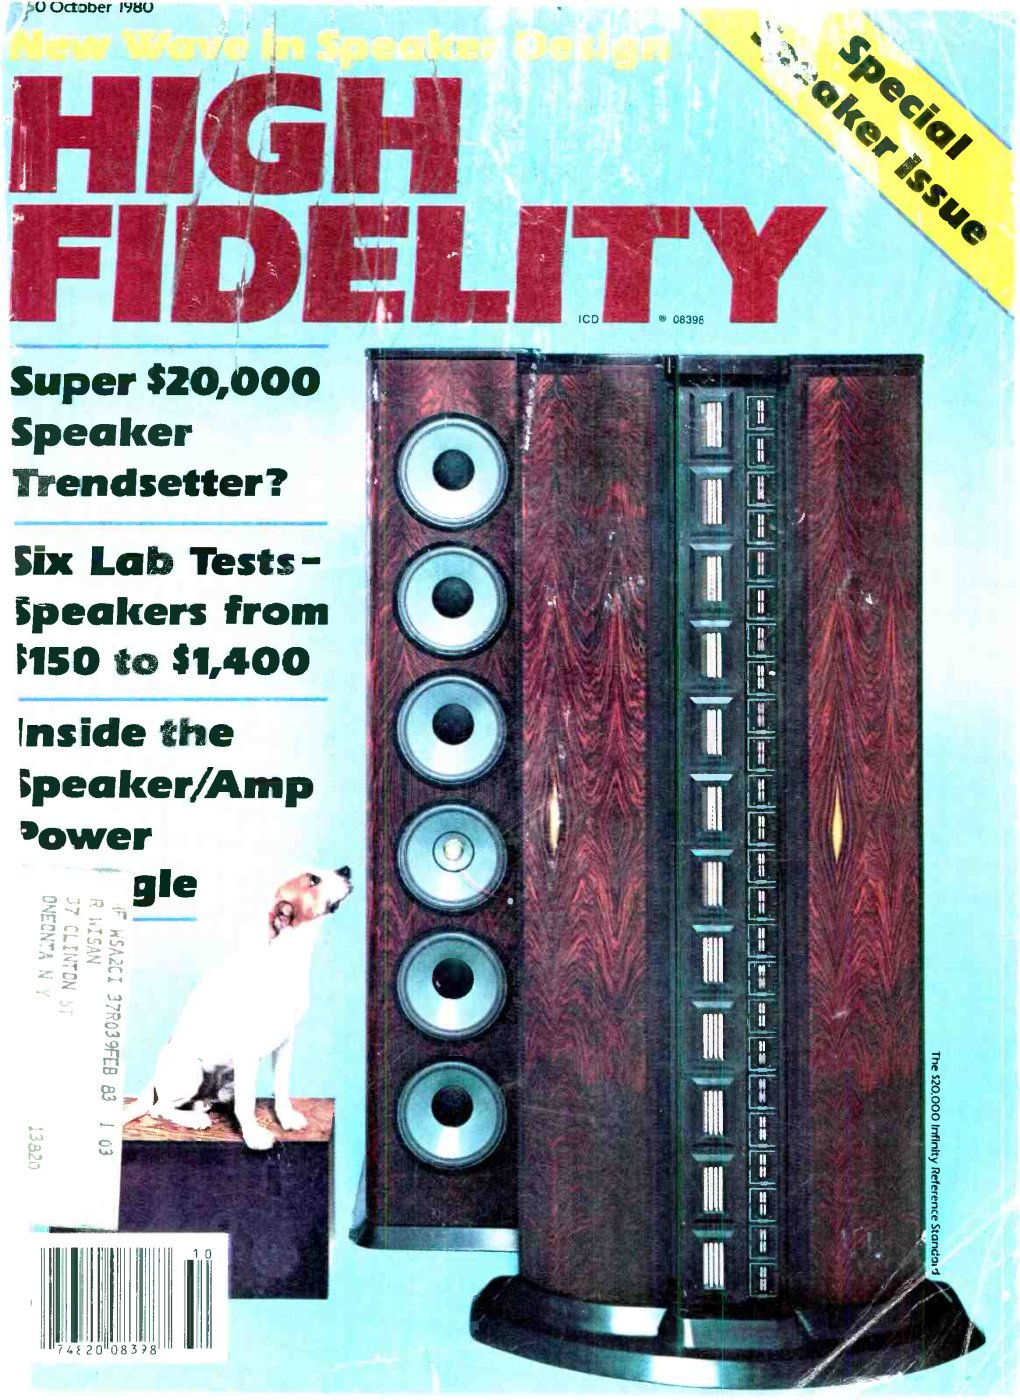 Speaker Super $20,000 Trendsetter? Six Labtests , P150 To$1,400 Speakers from Inside the Sower Cpeakeriamp CD SO October19t30 I 1.1 I IH 74E 20 O CO a 08328 Gle